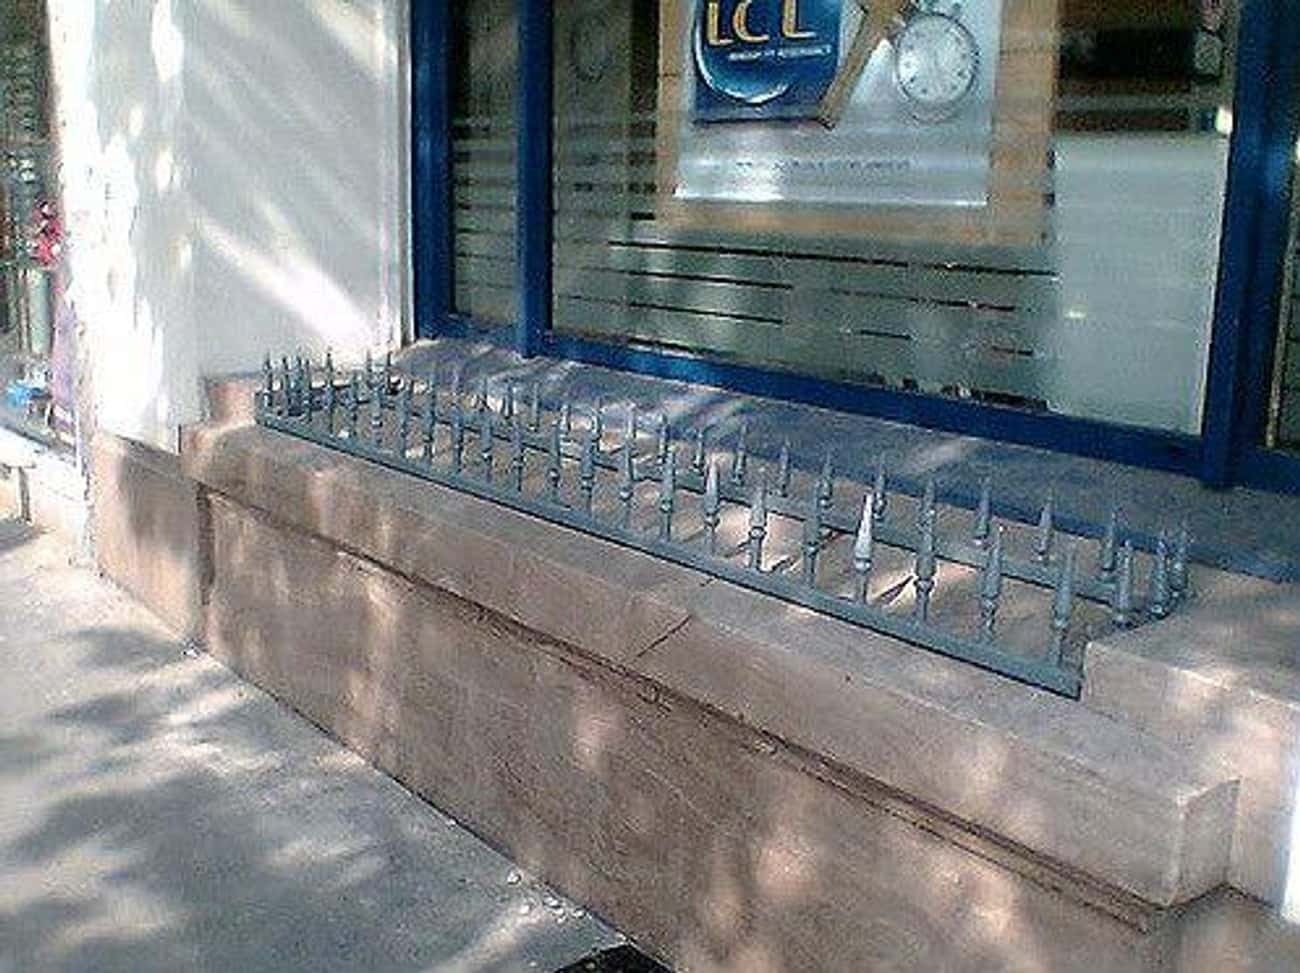 By Installing Spikes Where Homeless People Sleep